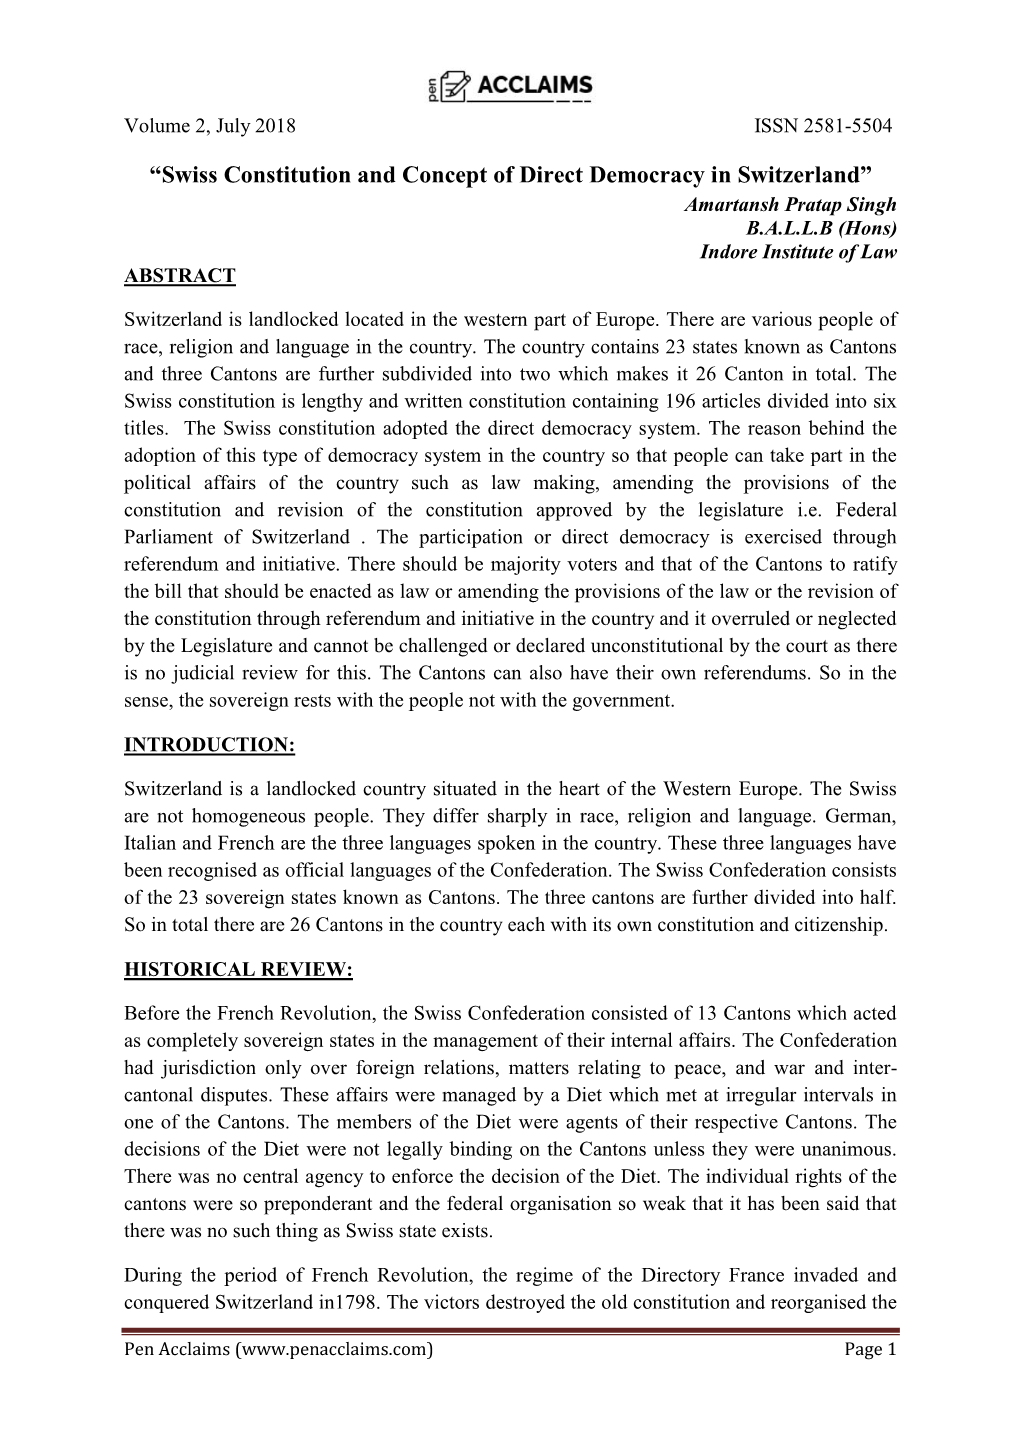 “Swiss Constitution and Concept of Direct Democracy in Switzerland” Amartansh Pratap Singh B.A.L.L.B (Hons) Indore Institute of Law ABSTRACT